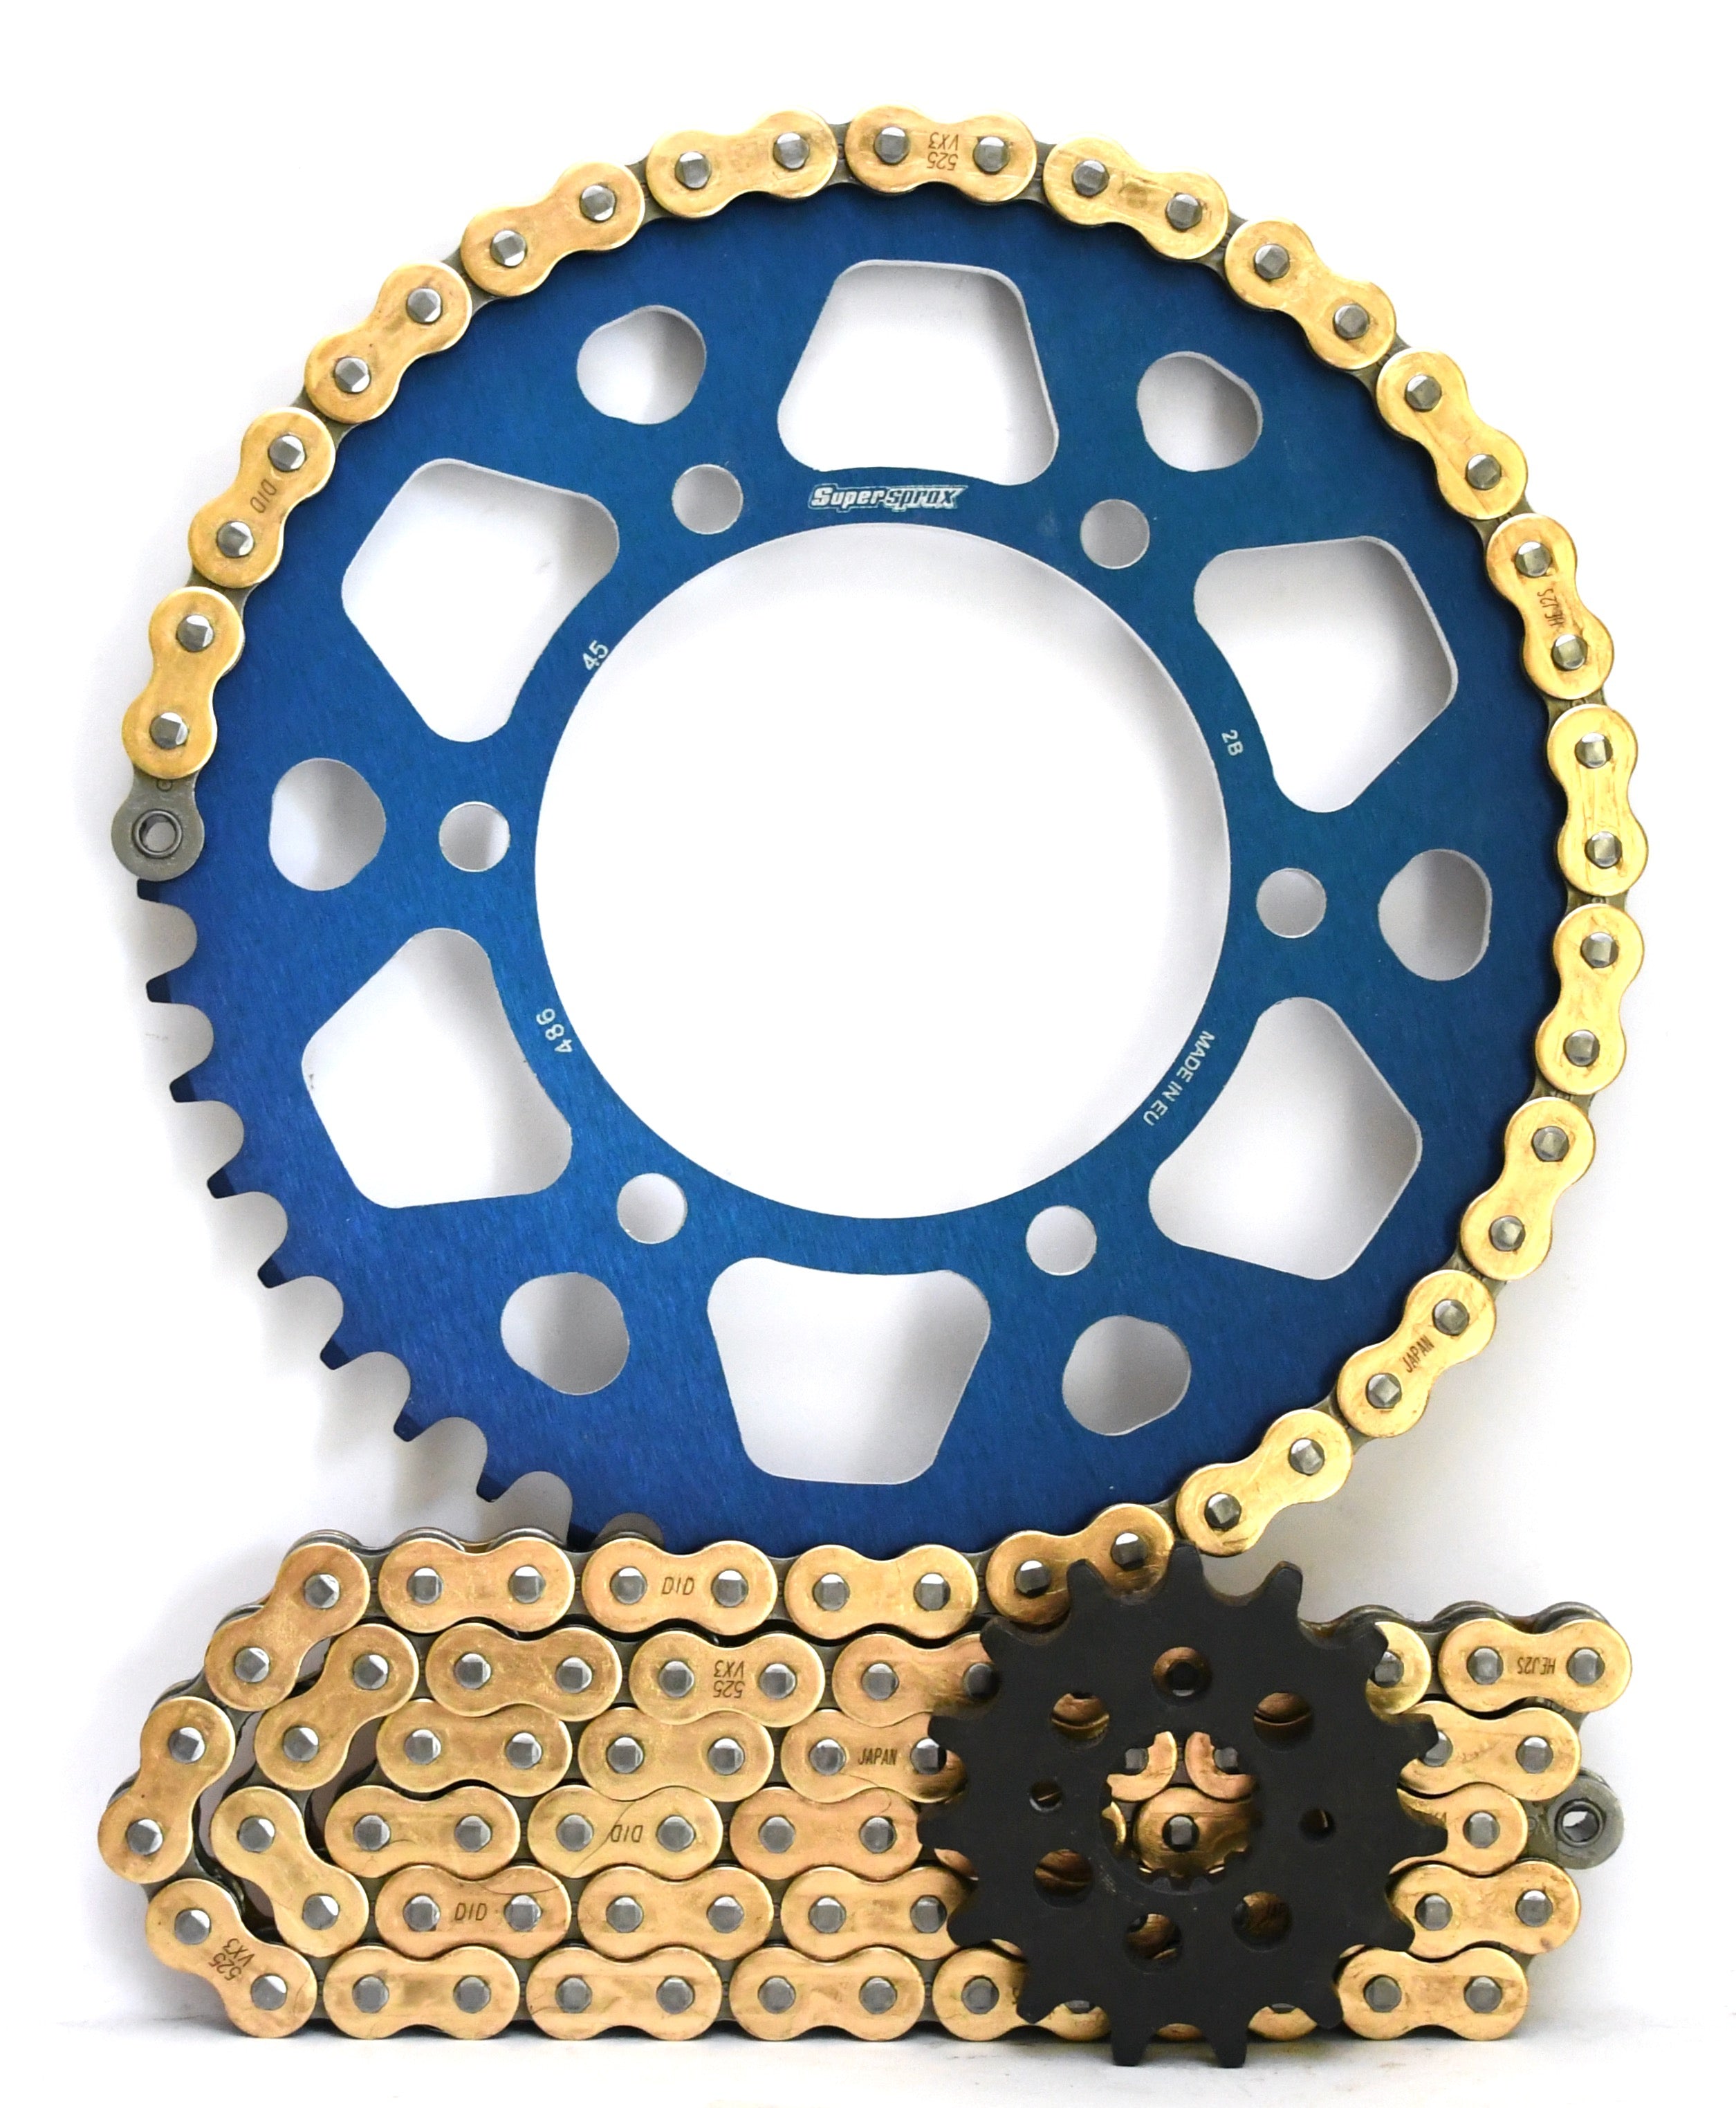 Supersprox and DID Chain & Aluminium Sprocket Kit for Yamaha R1 1998-2003 - 520 Conversion - Standard Gearing - 0